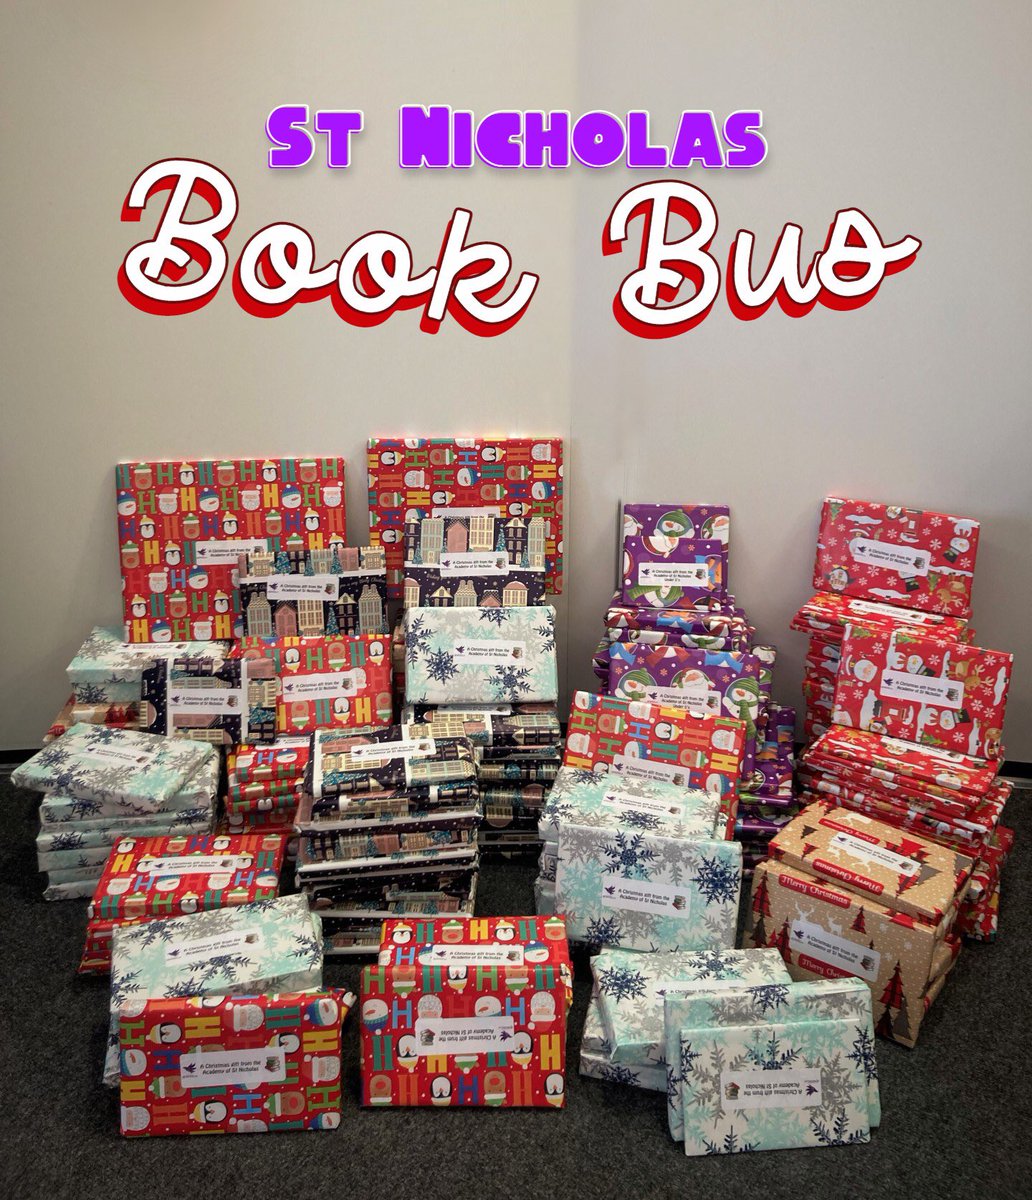 Thank you to all who donated books for the Book Bus, we have over 200! These will be delivered to the local community by our literacy elves on Tuesday 21st.